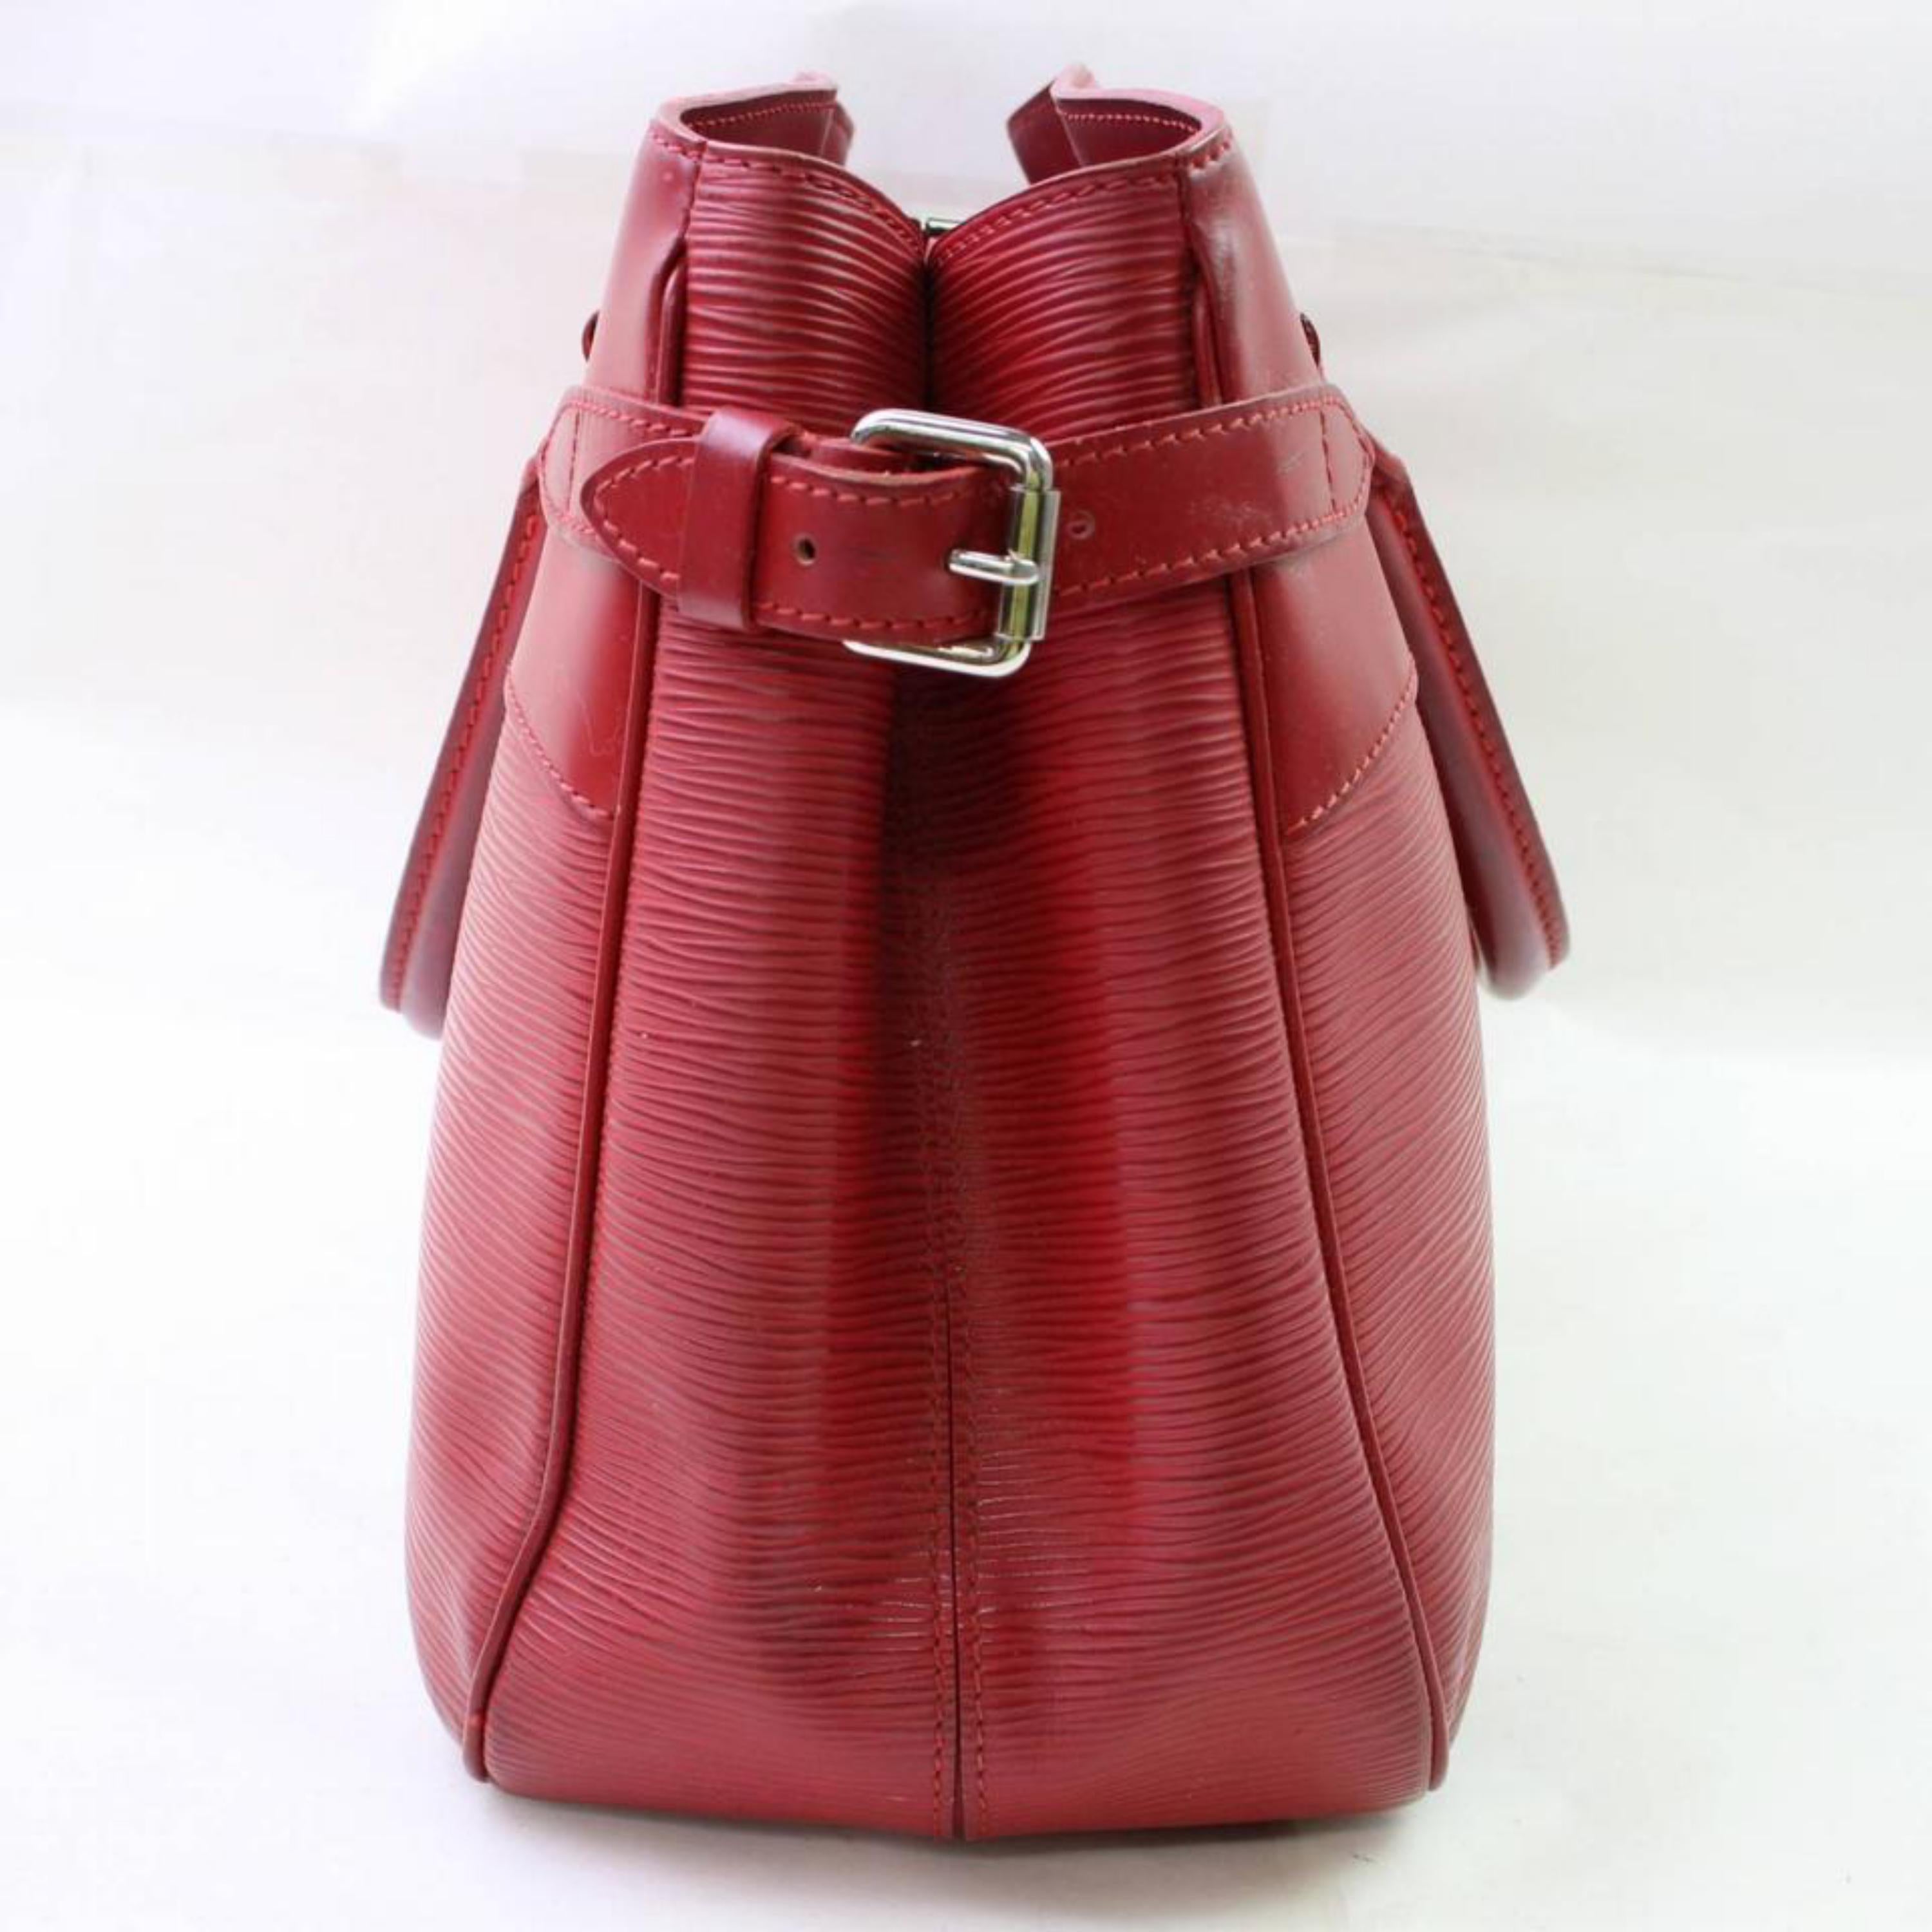 Louis Vuitton Passy Epi Pm 866705 Red Leather Satchel In Good Condition For Sale In Forest Hills, NY